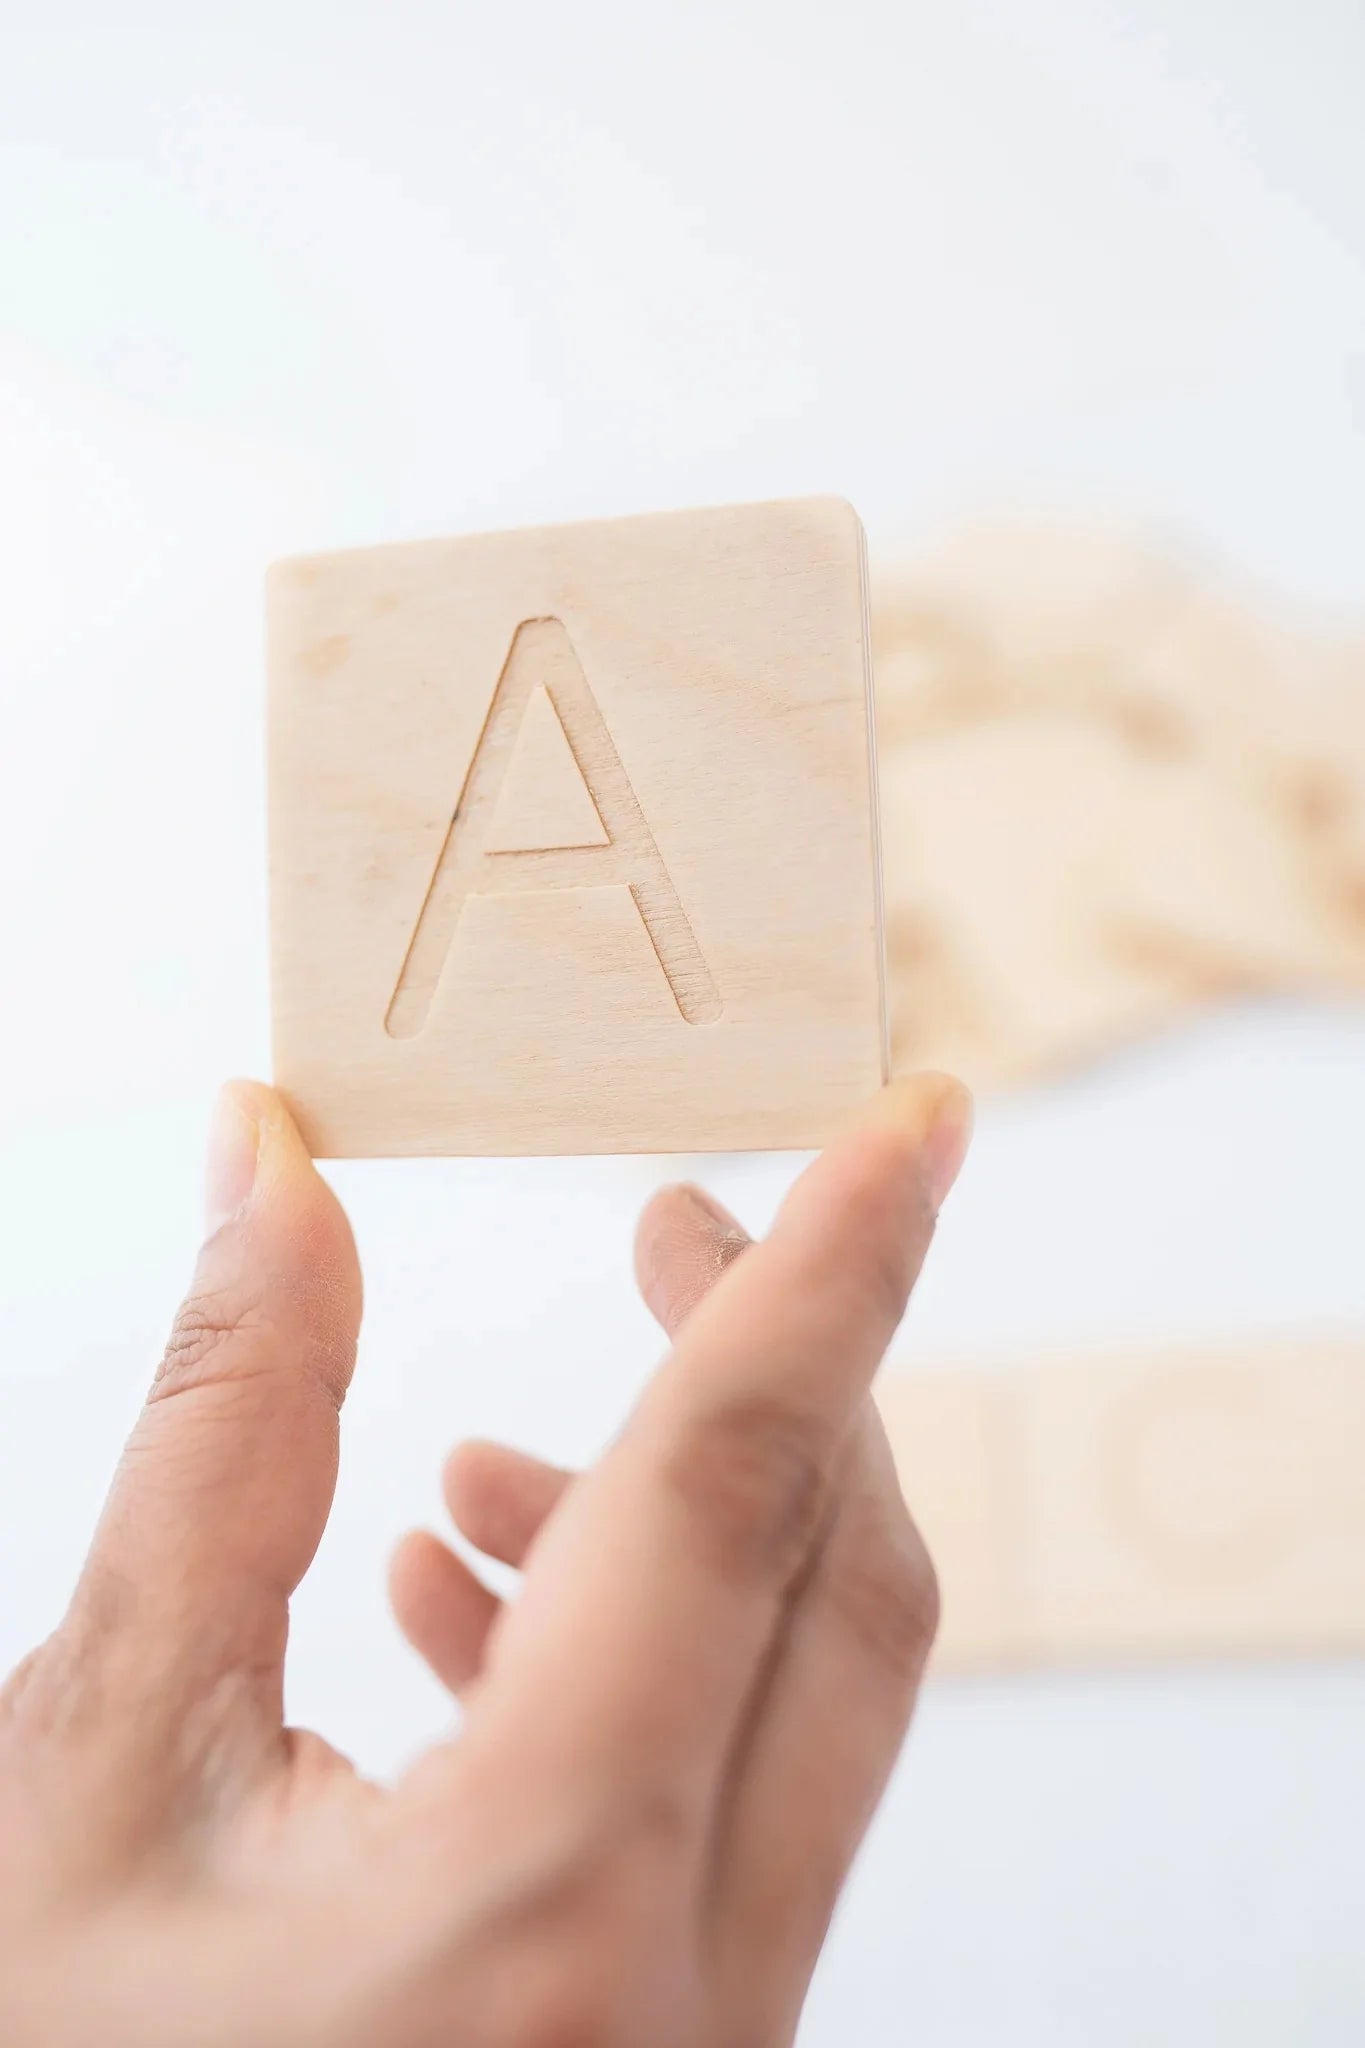 Buy Alphabets Letter Tracing Wooden Tiles - Size - SkilloToys.com